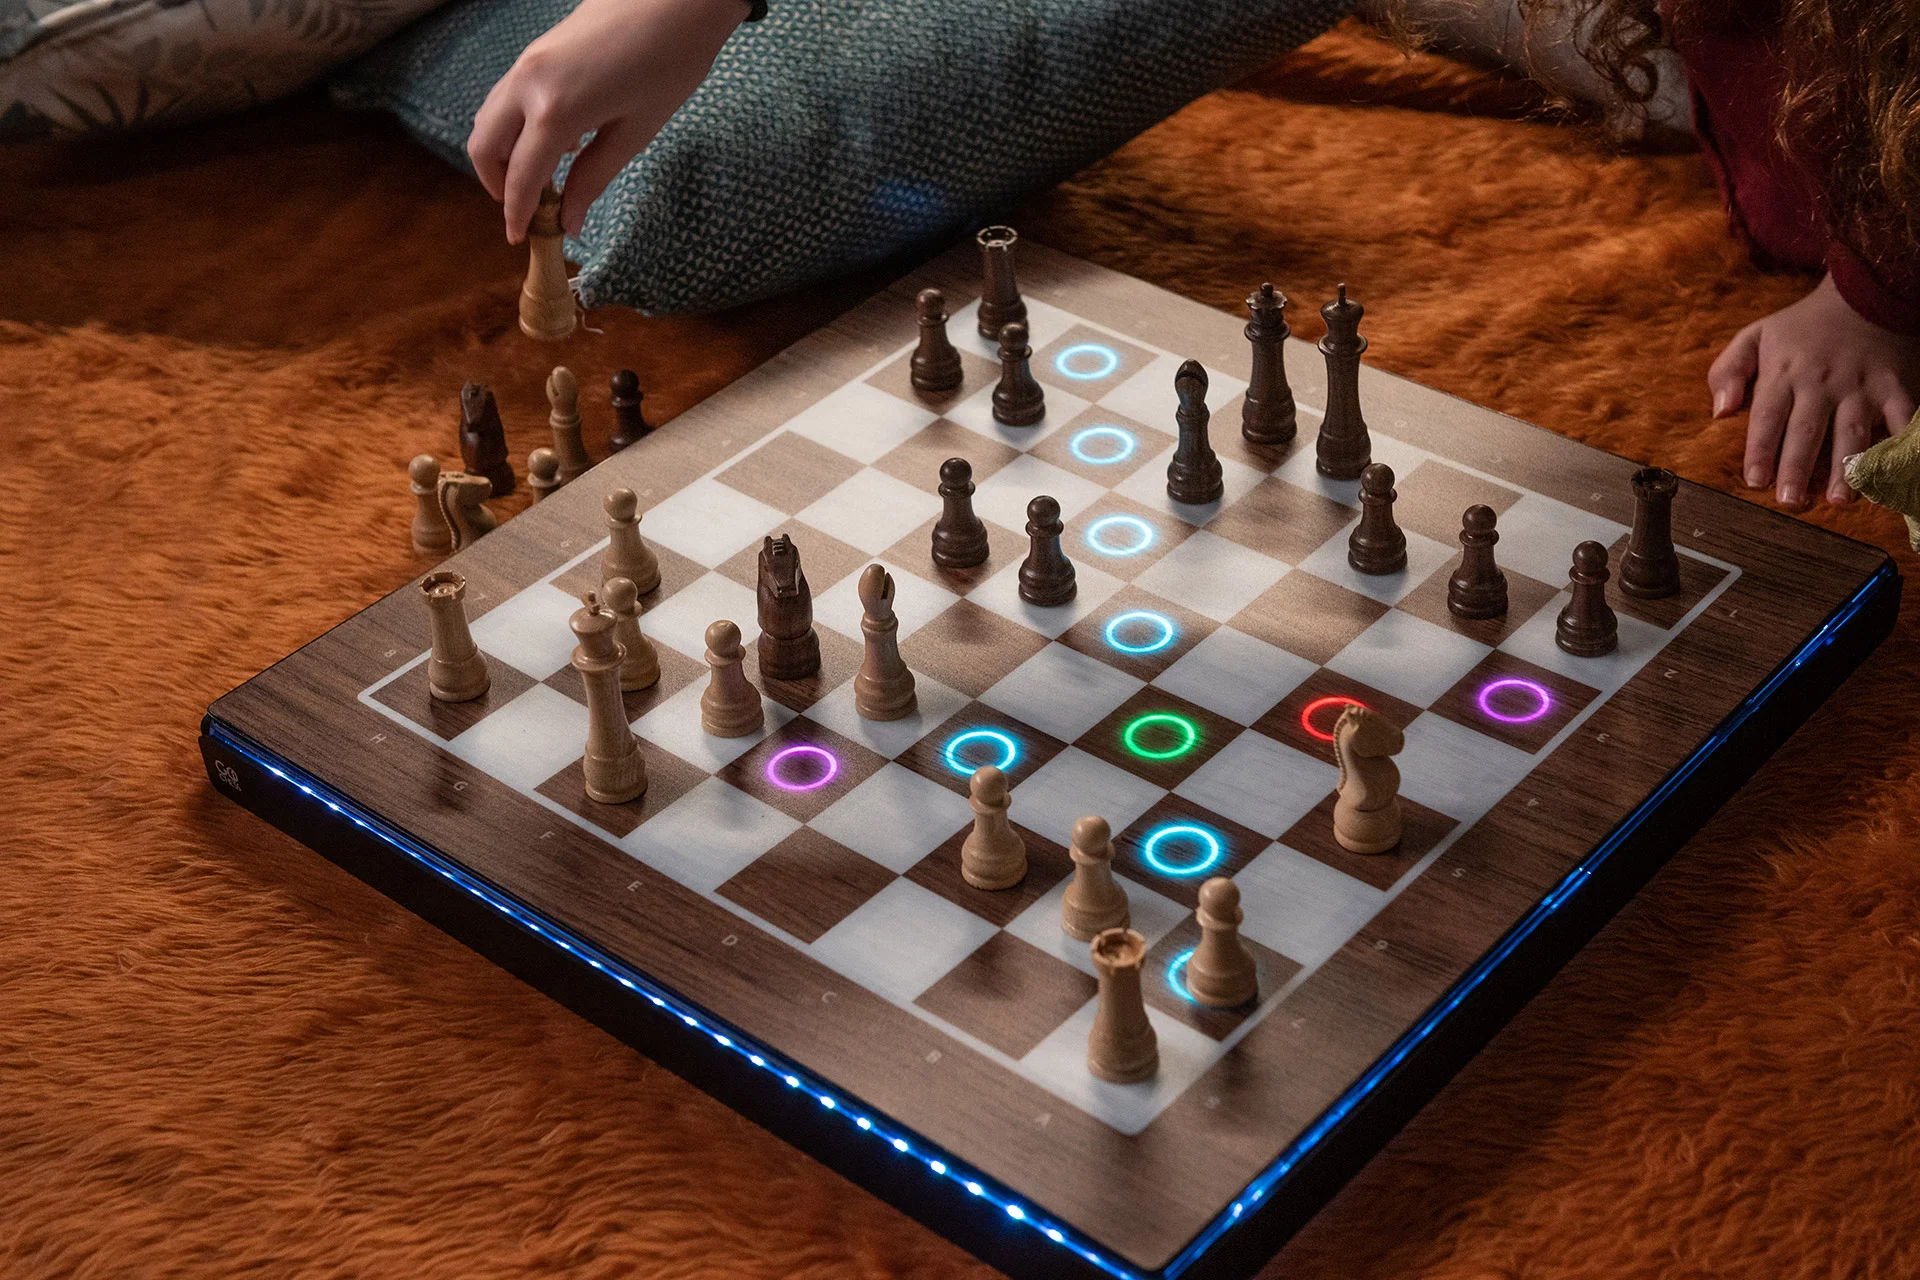 GoChess is a board for playing chess with an opponent from anywhere in the world.